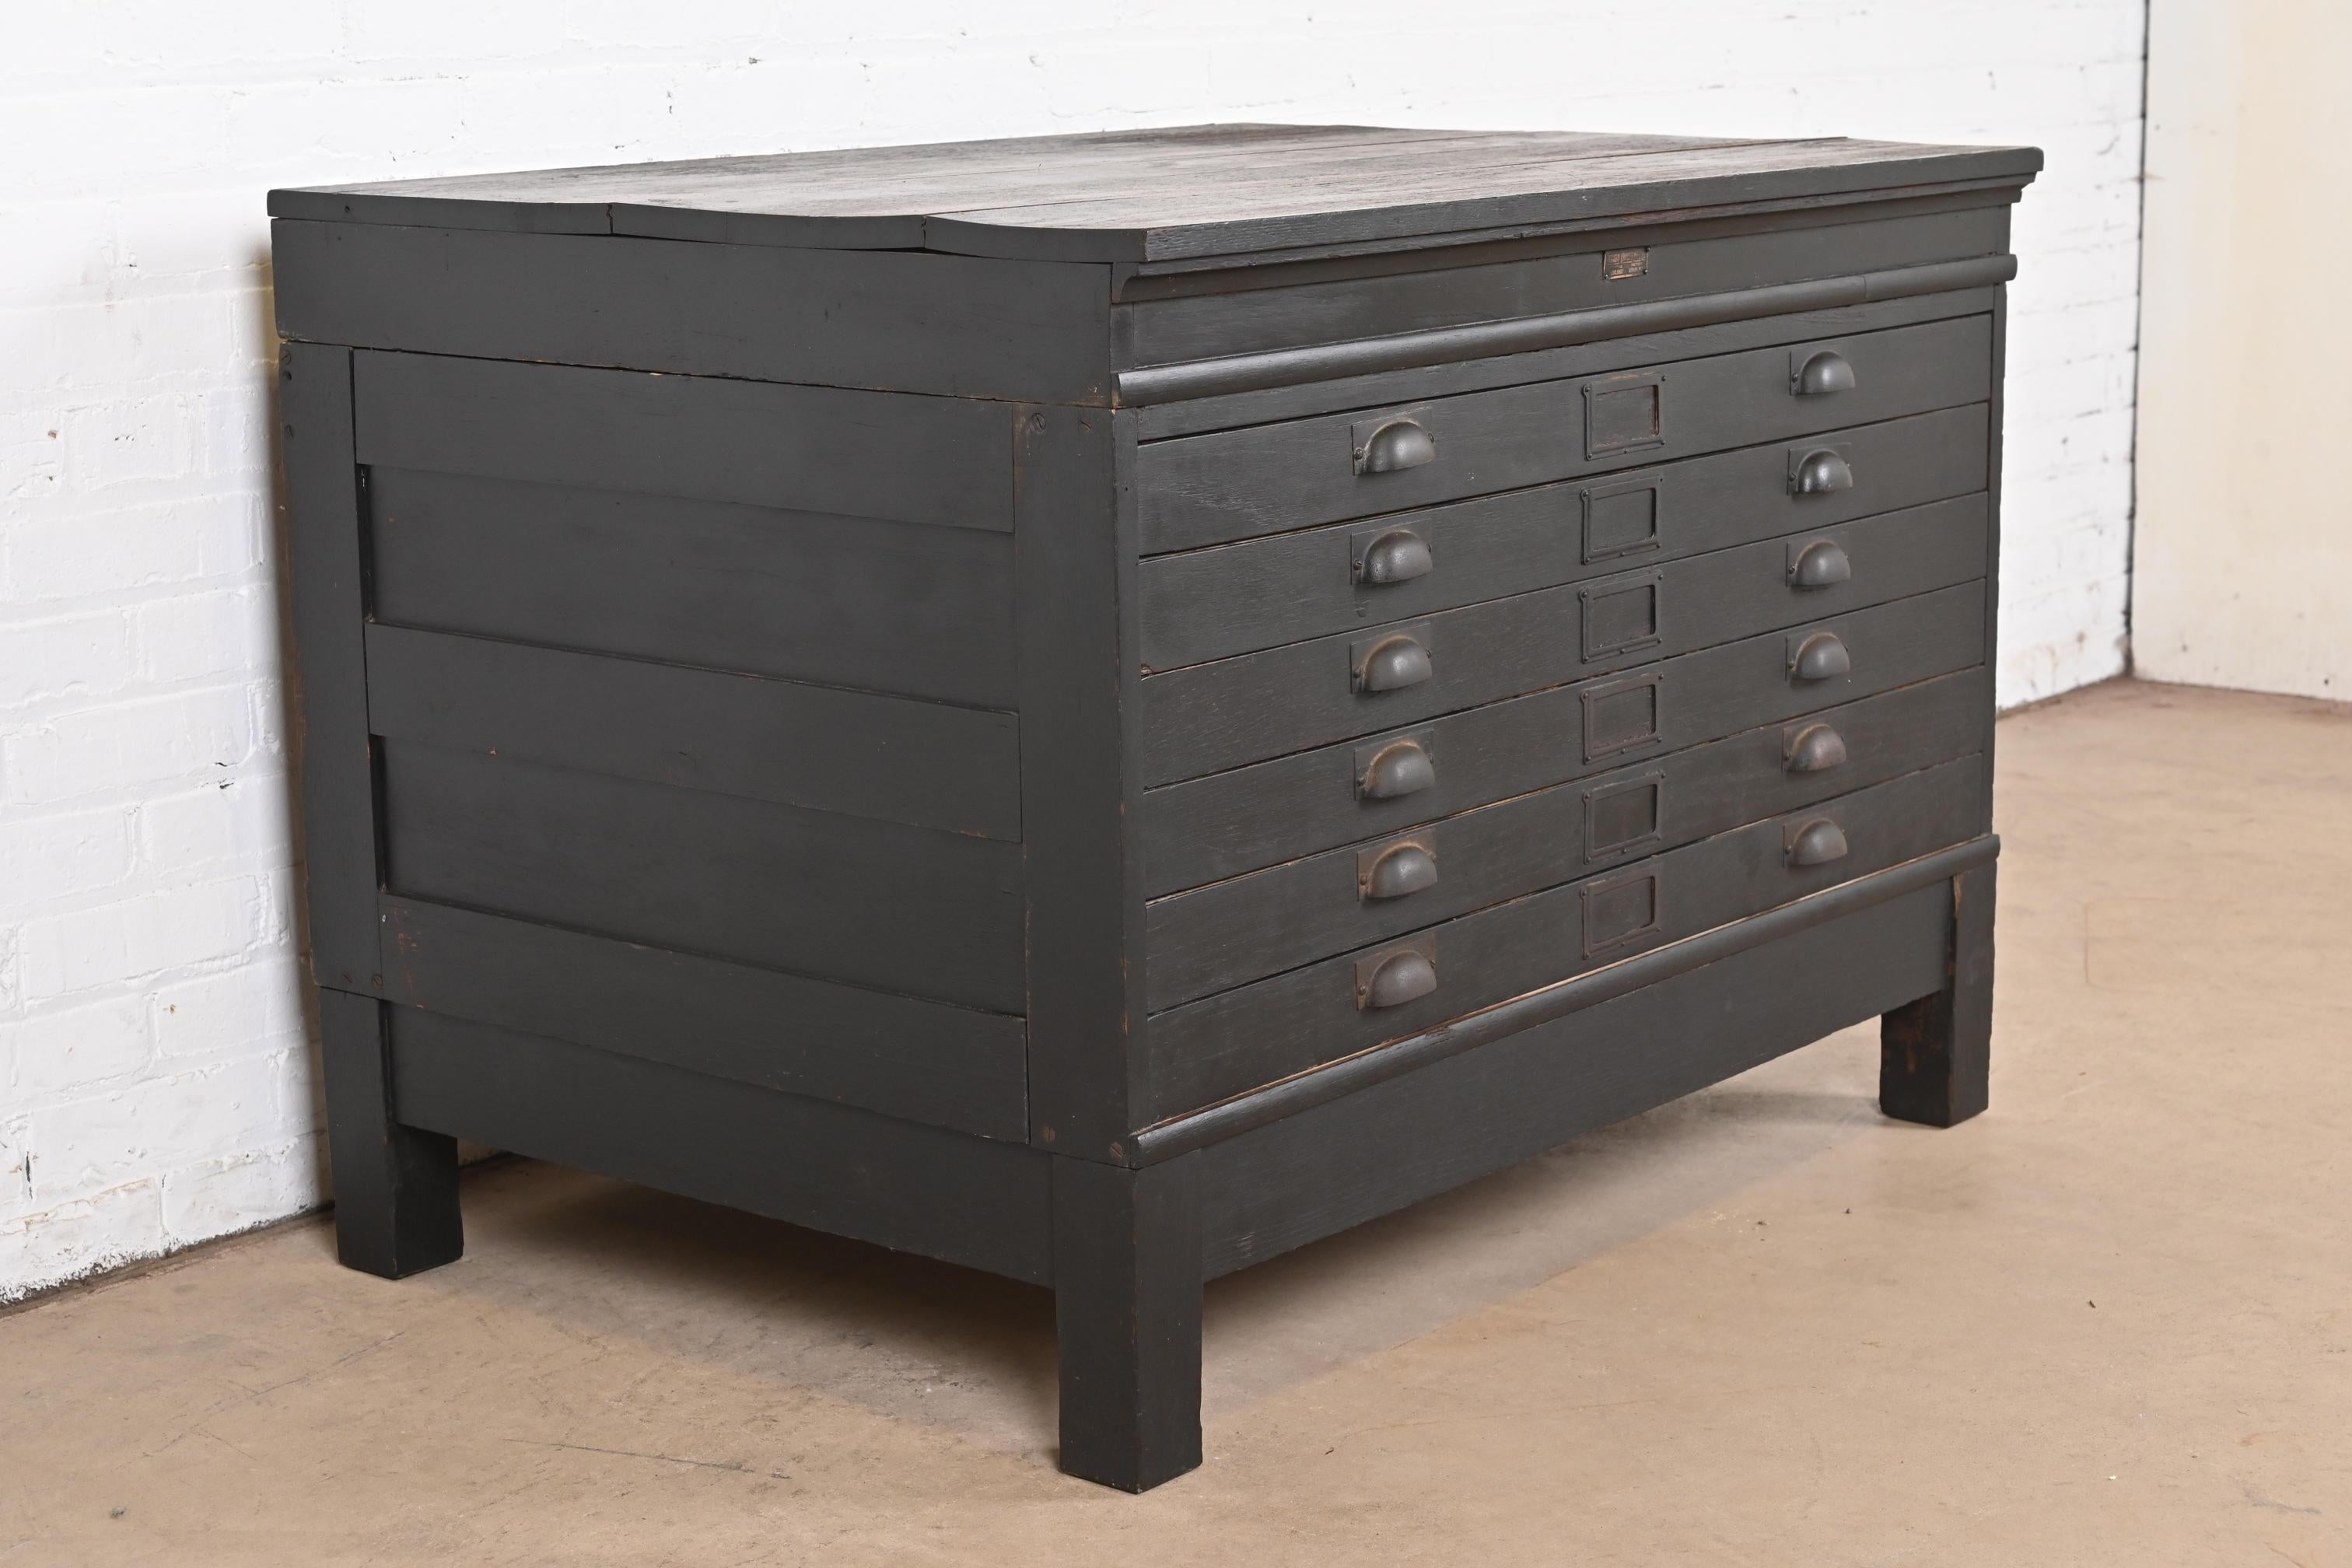 Antique Arts & Crafts Ebonized Oak Architect's Blueprint Flat File Cabinet In Good Condition For Sale In South Bend, IN